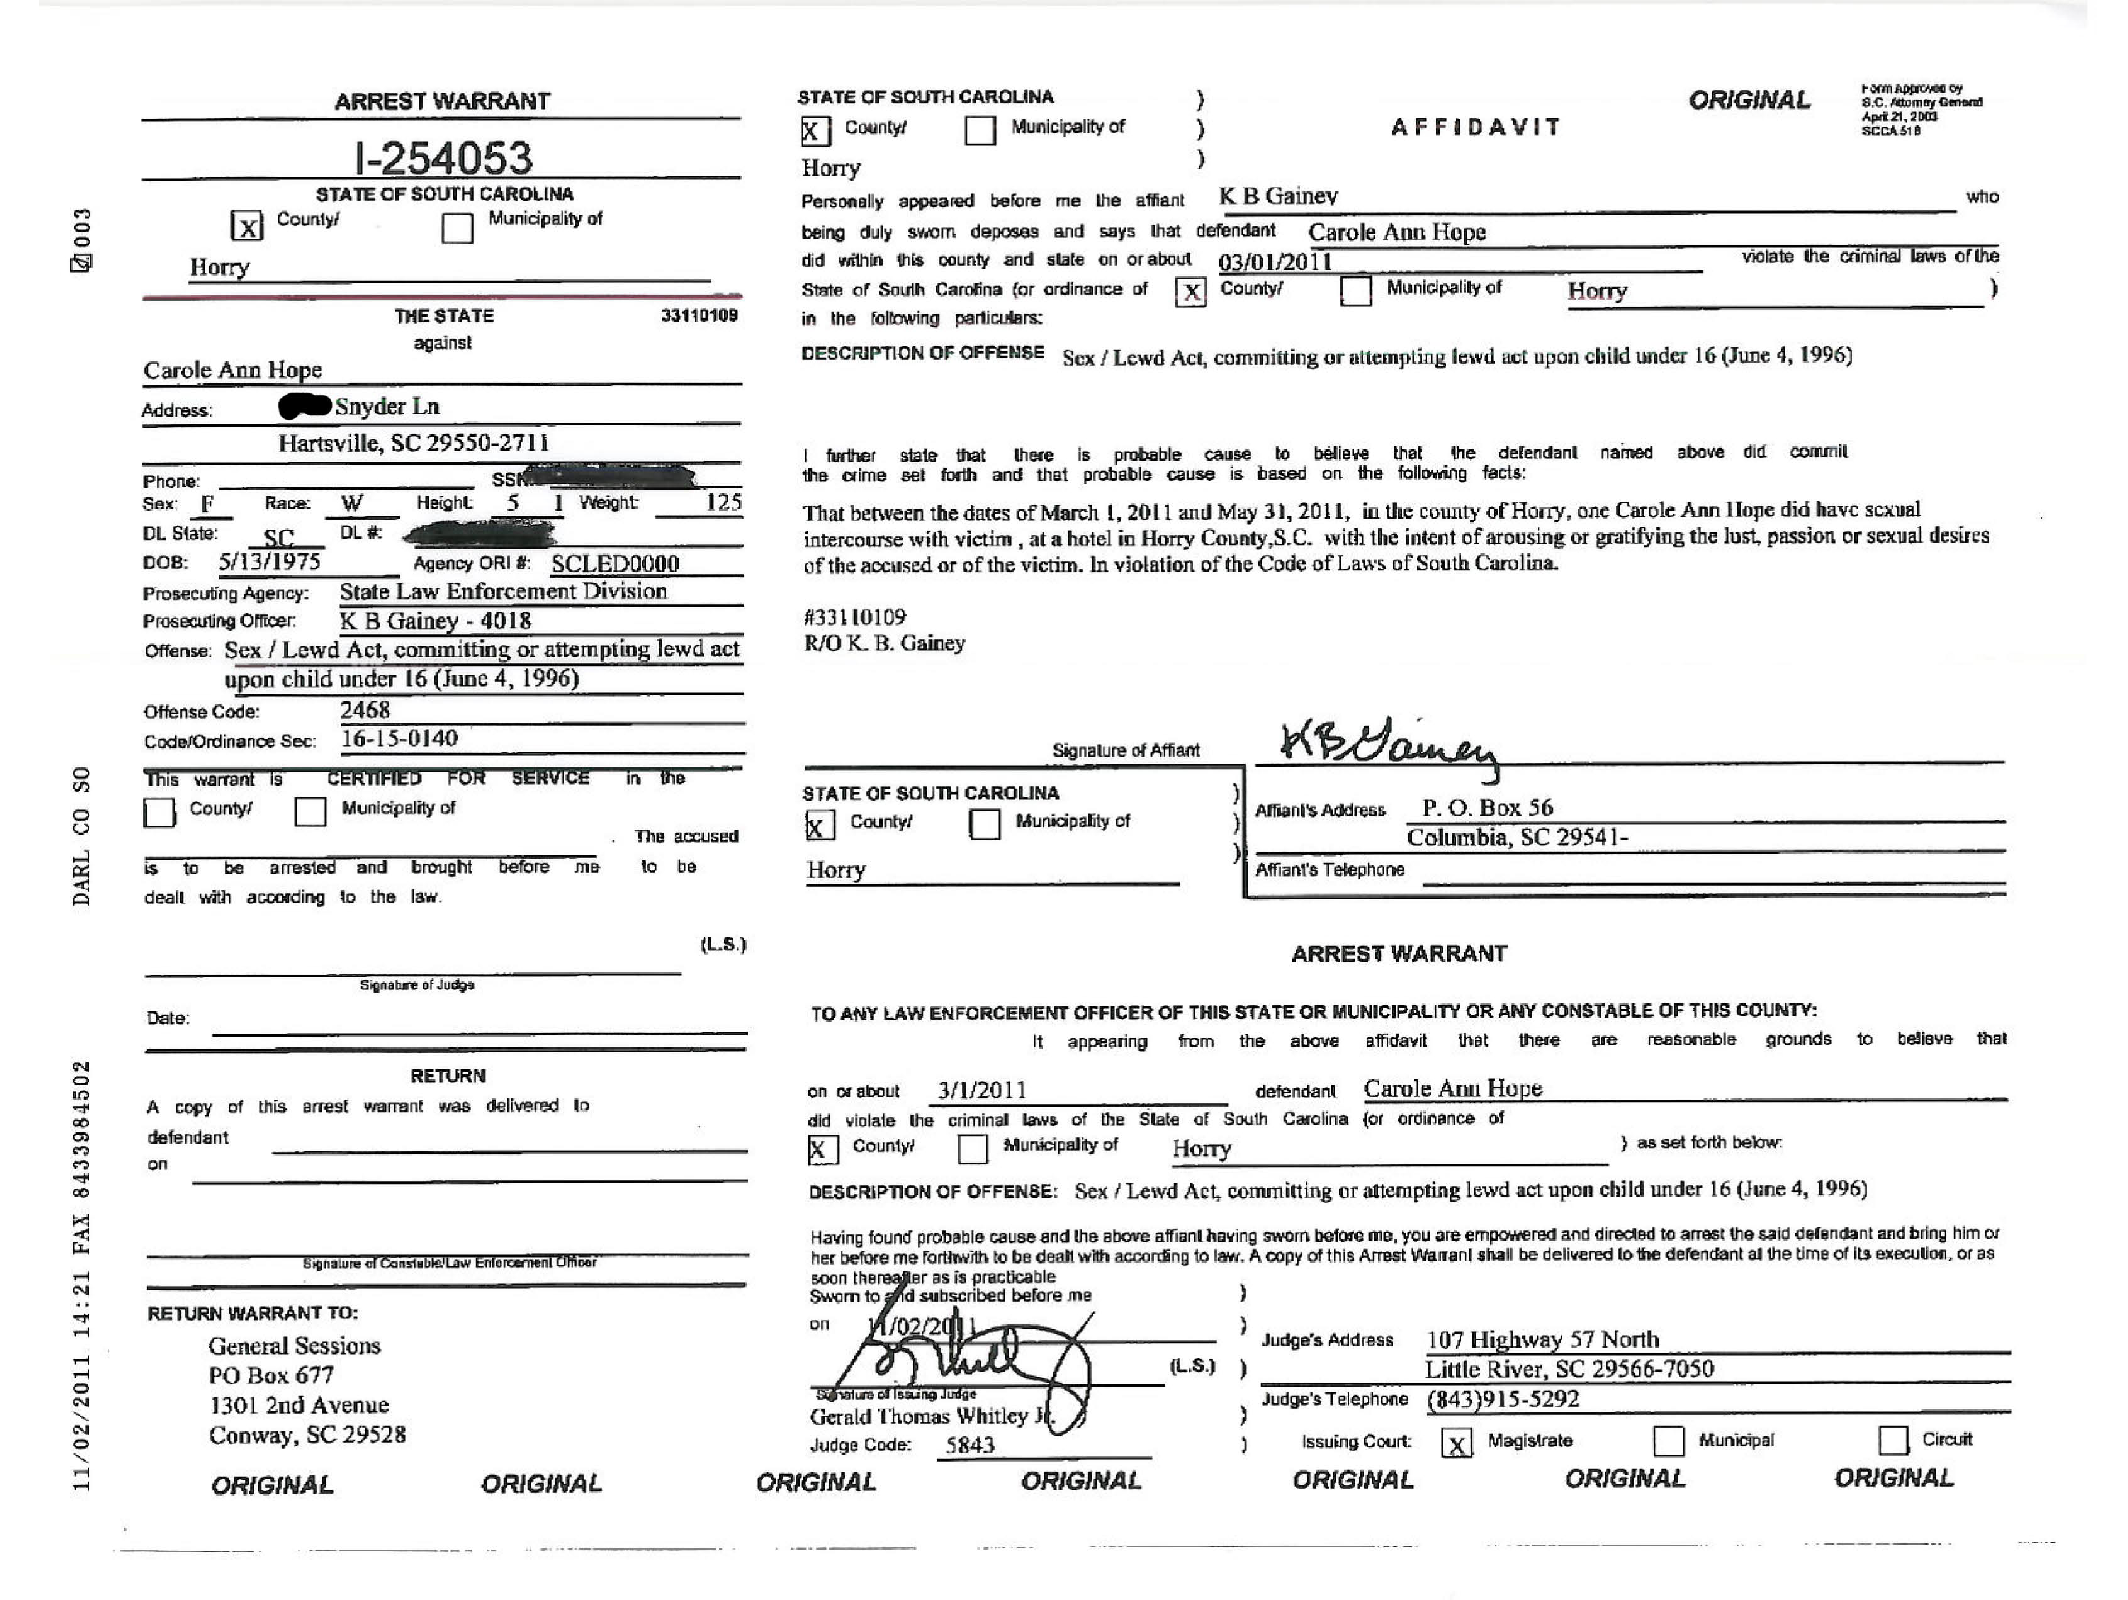 hope carole ann horry county arrest warrant.png